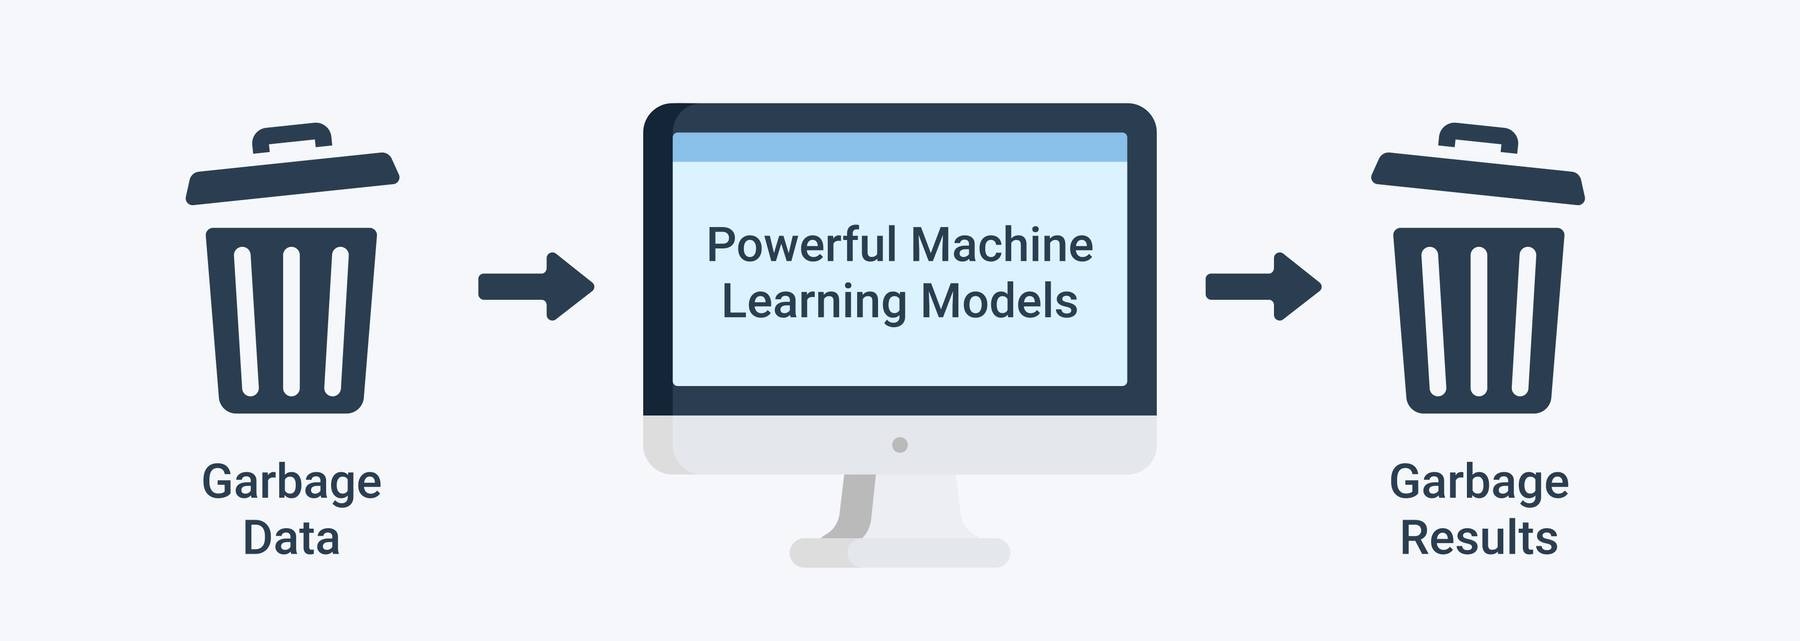 Garbage going into powerful machine learning models and garbage coming out.